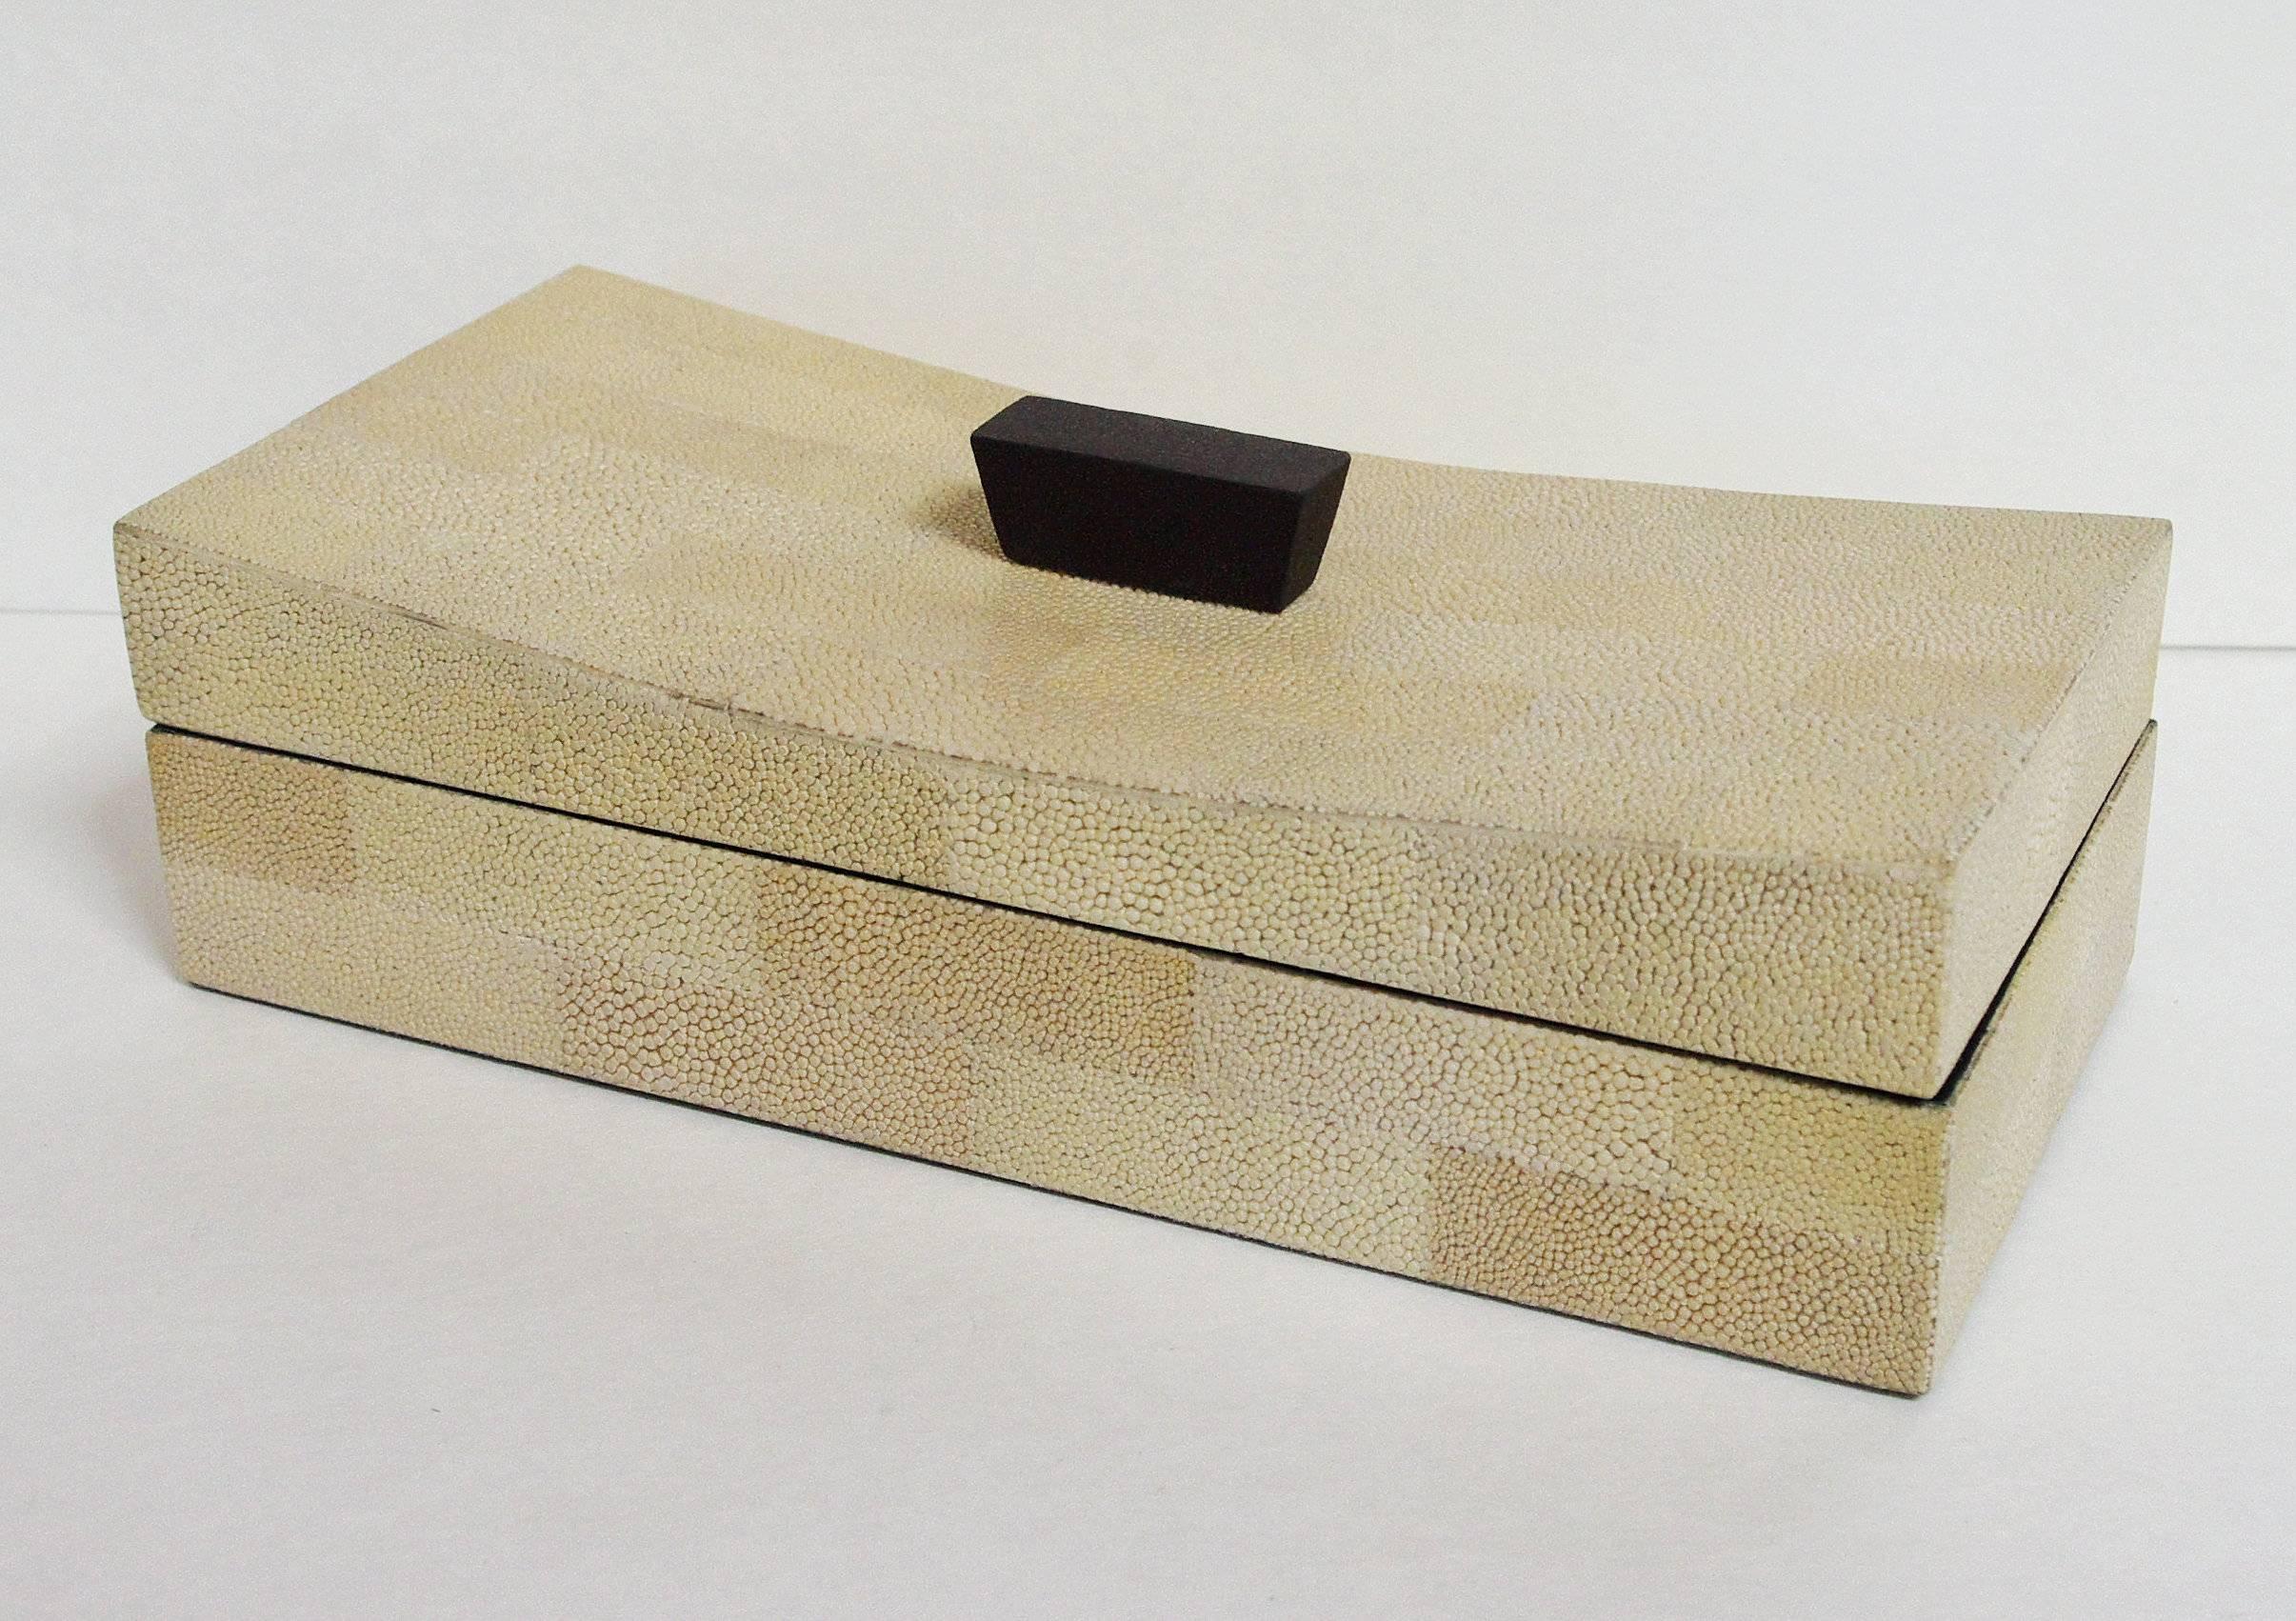 Beige shagreen box with curved lid
Depth: 6 inches / Width: 12 inches / Height: 4.5 inches
2 in stock in Palm Springs ON FINAL CLEARANCE SALE for $595 each!!! 
Order Reference #: FABIOLTD MR17
This piece makes for great and unique gift!